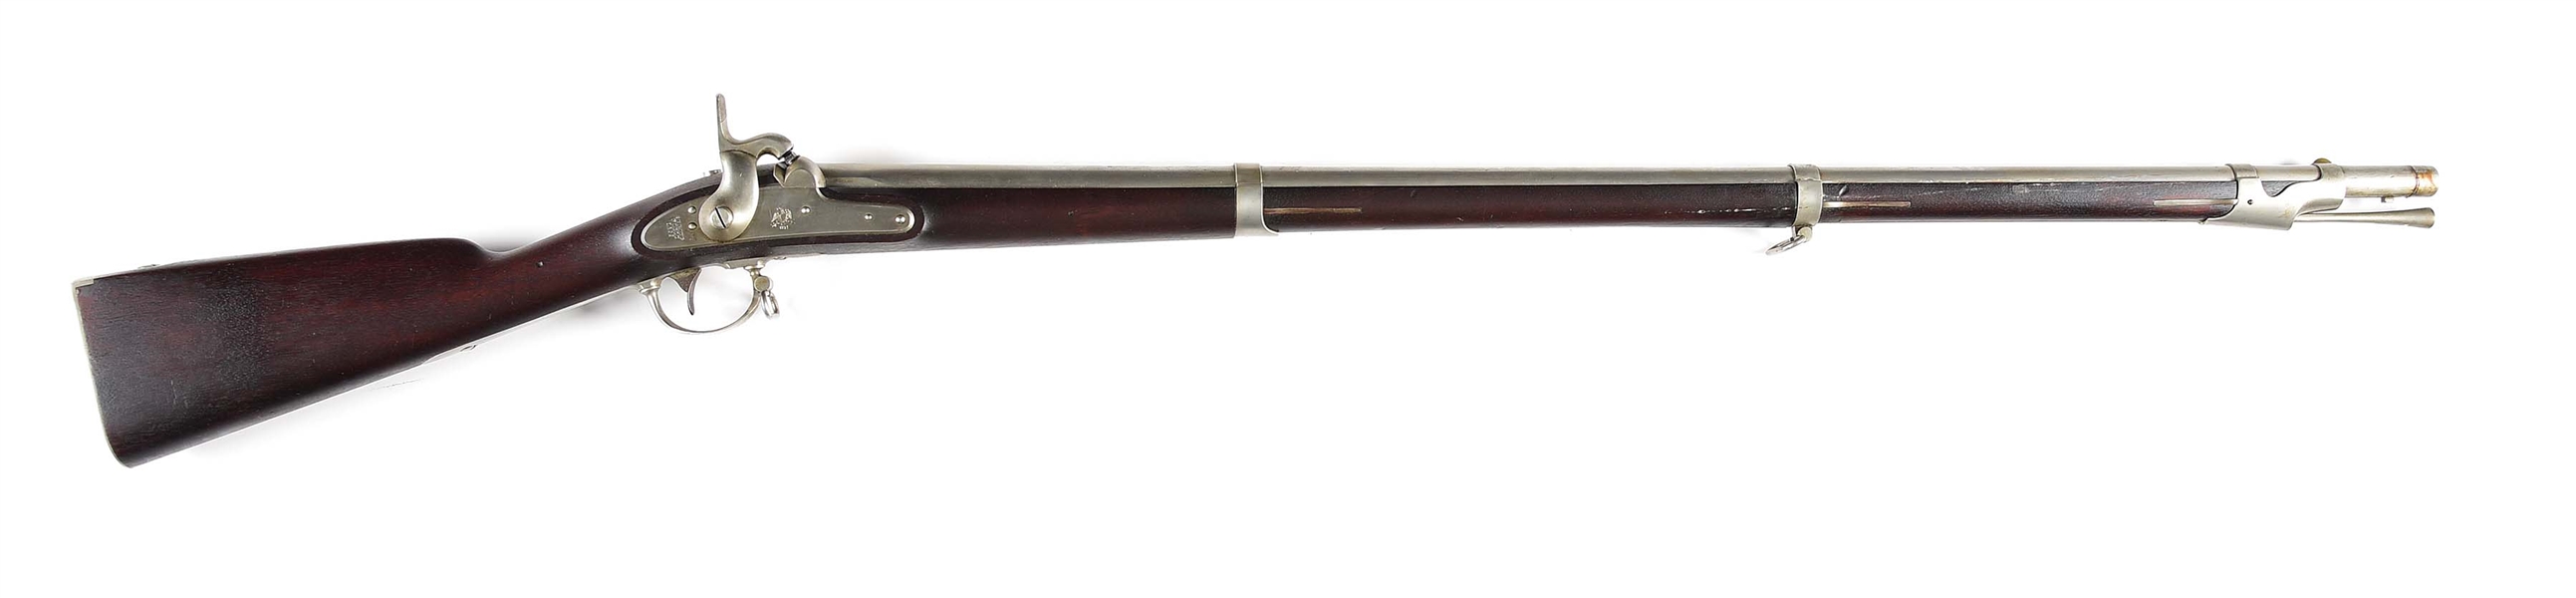 (A) EXTREMELY FINE SPRINGFIELD MODEL 1842 .69 CALIBER PERCUSSION RIFLE DATED 1853.